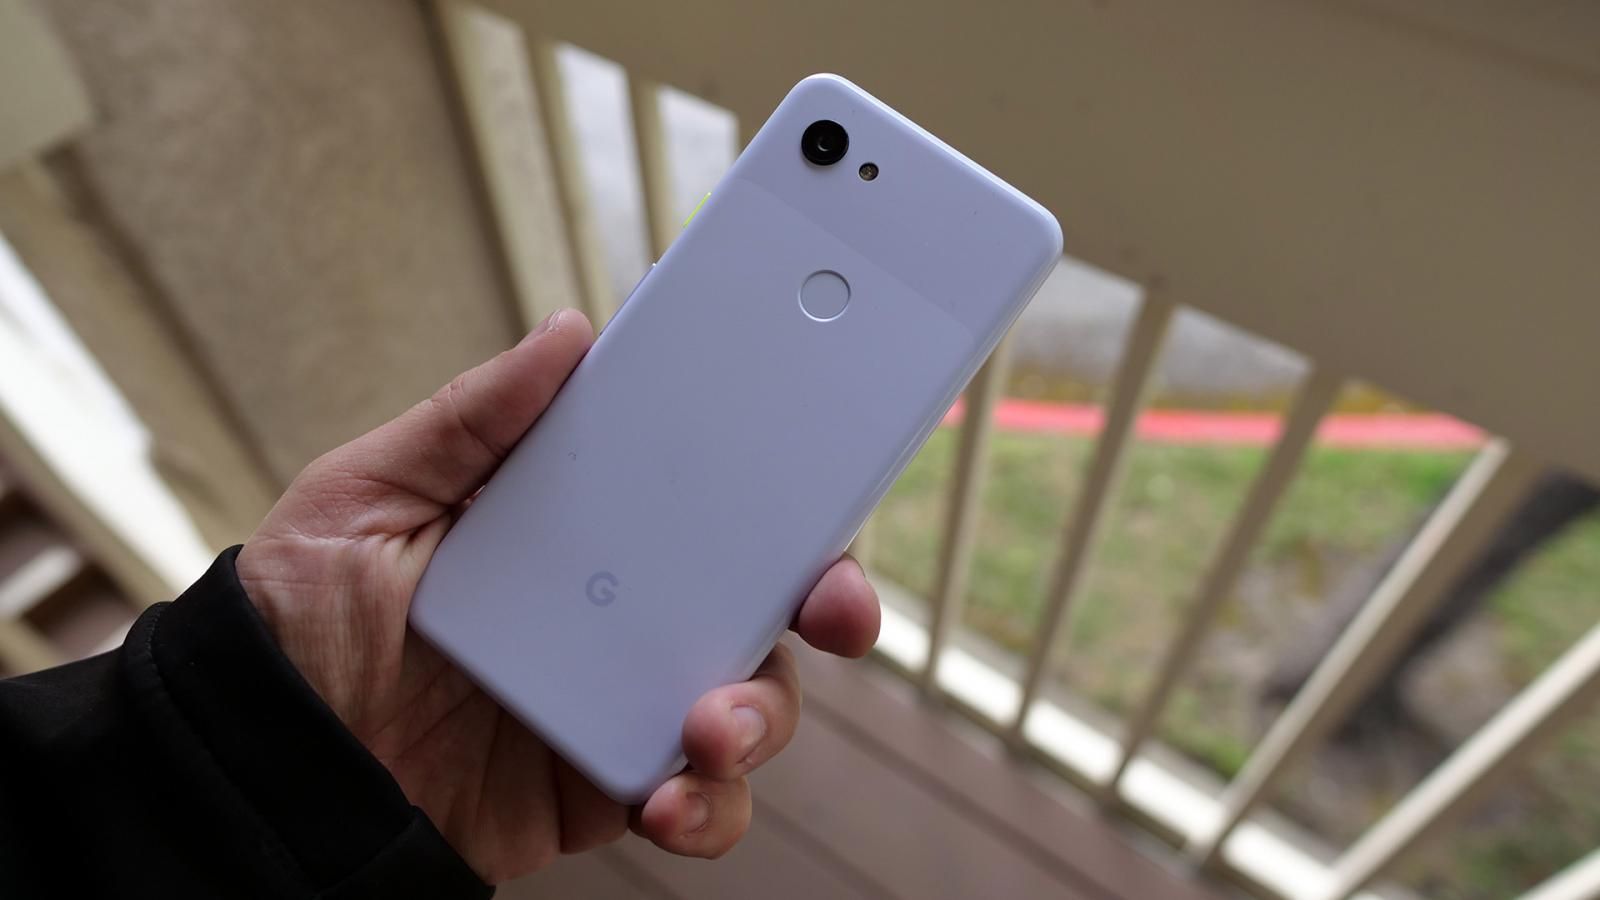 Pixel 3a hands-on